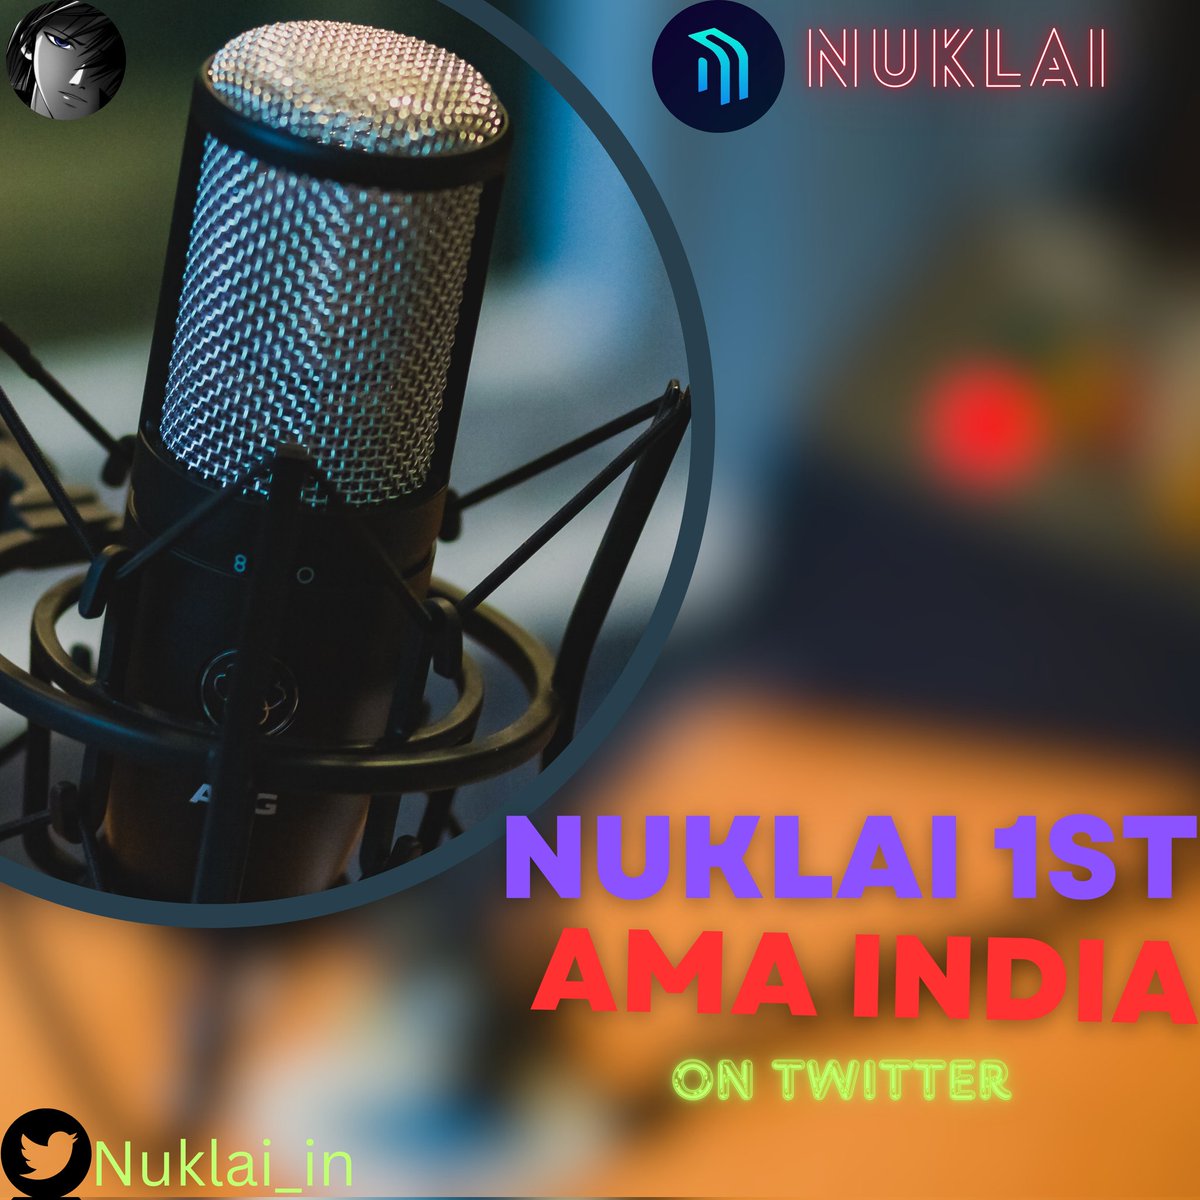 Calling all Nuklaians! ✅

Our first AMA is happening this Tuesday, April 16th at 8 PM IST!  ️

Got questions about Nuklai Data? This is your chance to get answers directly from the team. Don't miss out!  ✨

➡️ #SmartData  $NAI  @Nuklai_IN